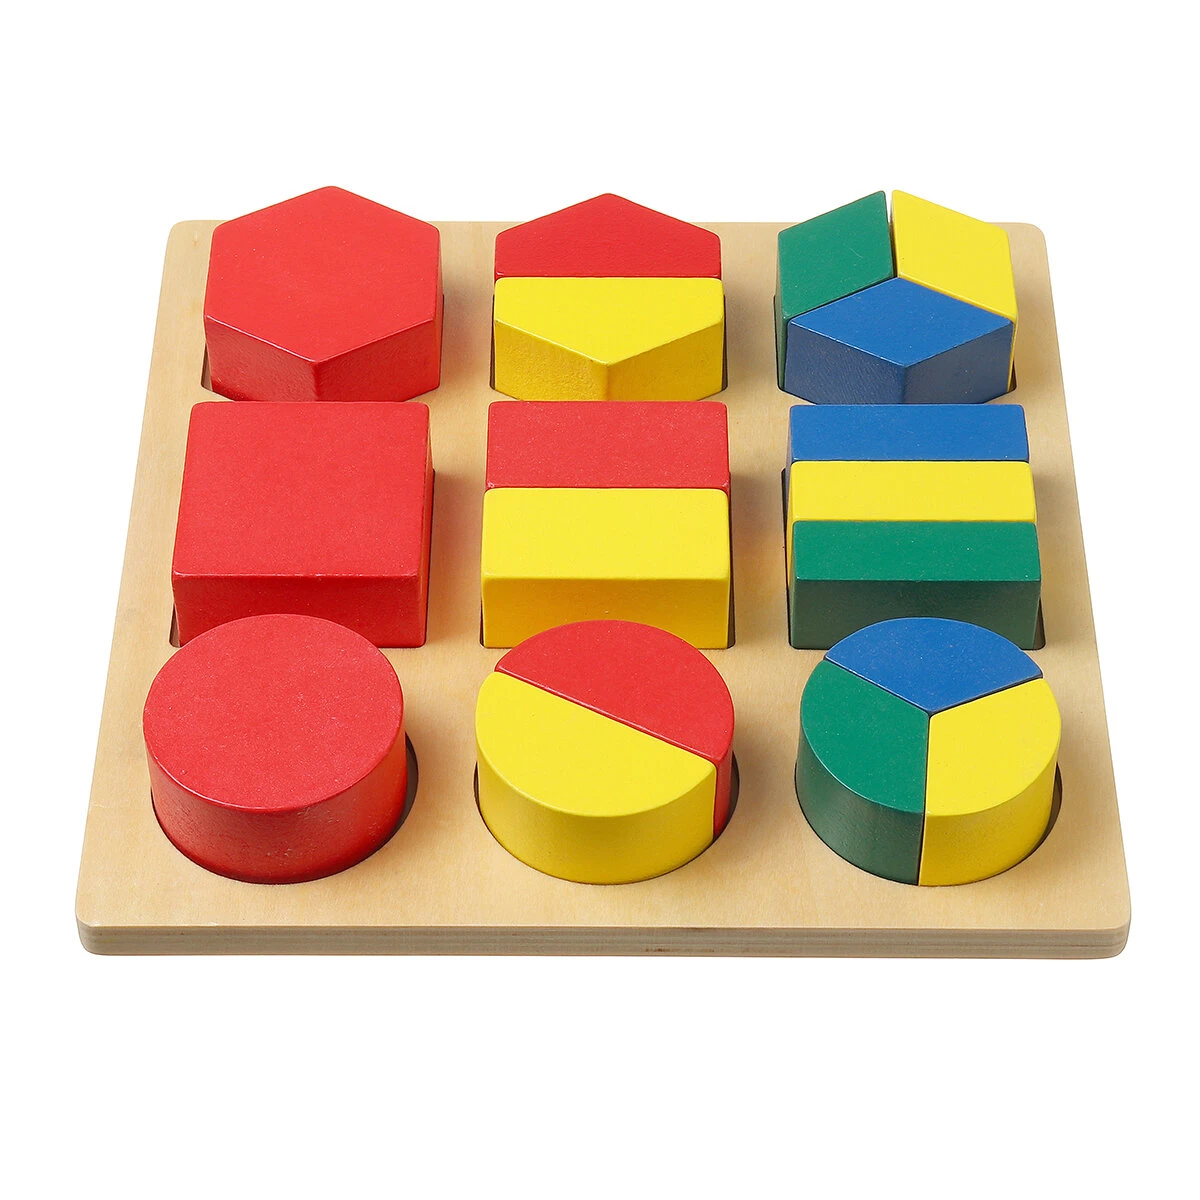 Wooden geometric blocks 3d geometric shapes puzzle kids brain development early educational toys for childrens gifts